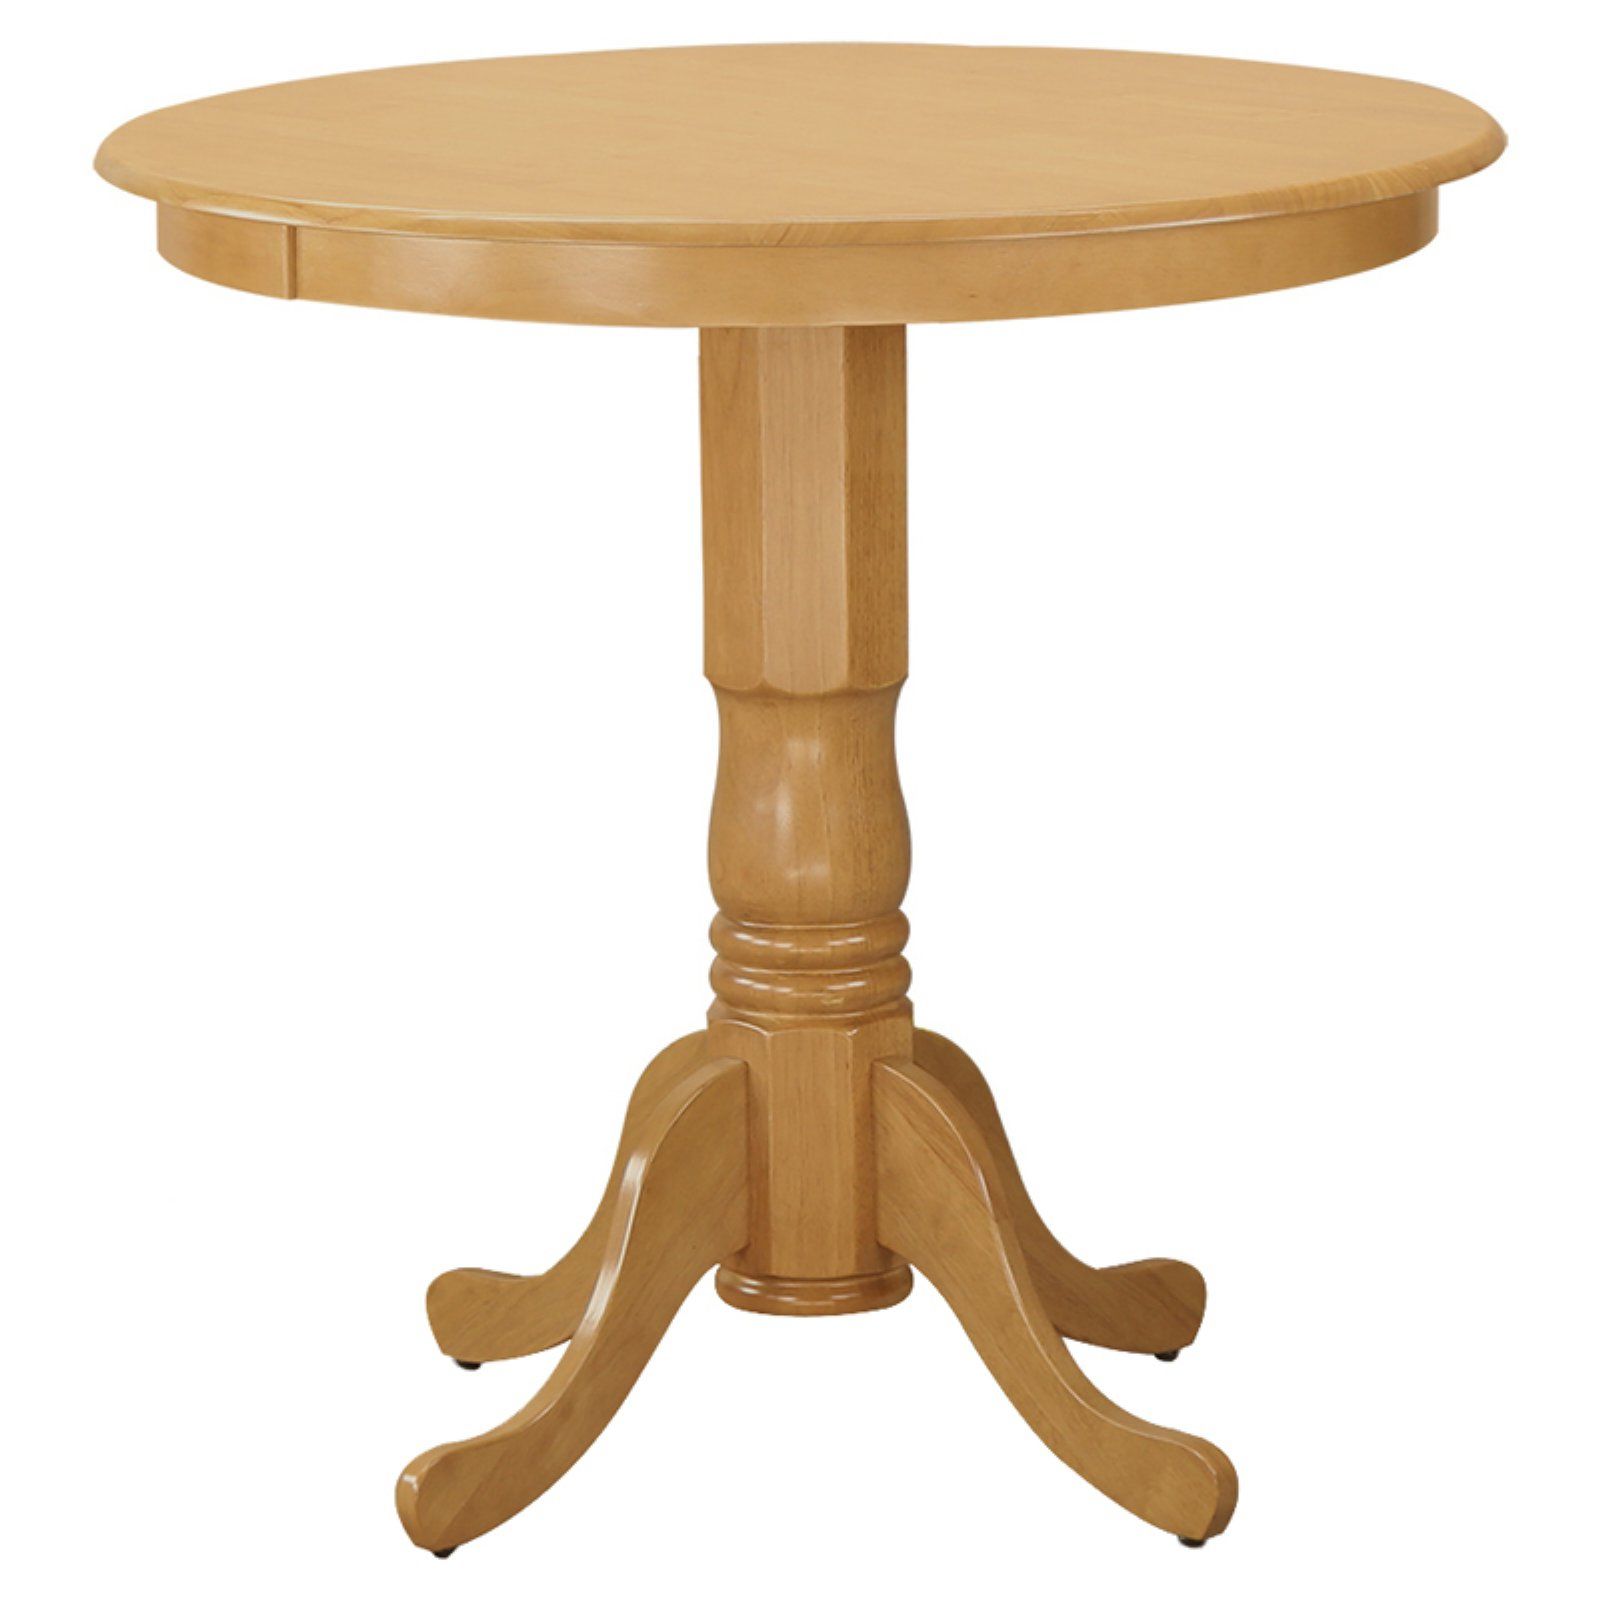 Widely Used East West Furniture Jackson Pedestal 36 Inch Round Counter With Regard To Hemmer 32'' Pedestal Dining Tables (View 9 of 20)